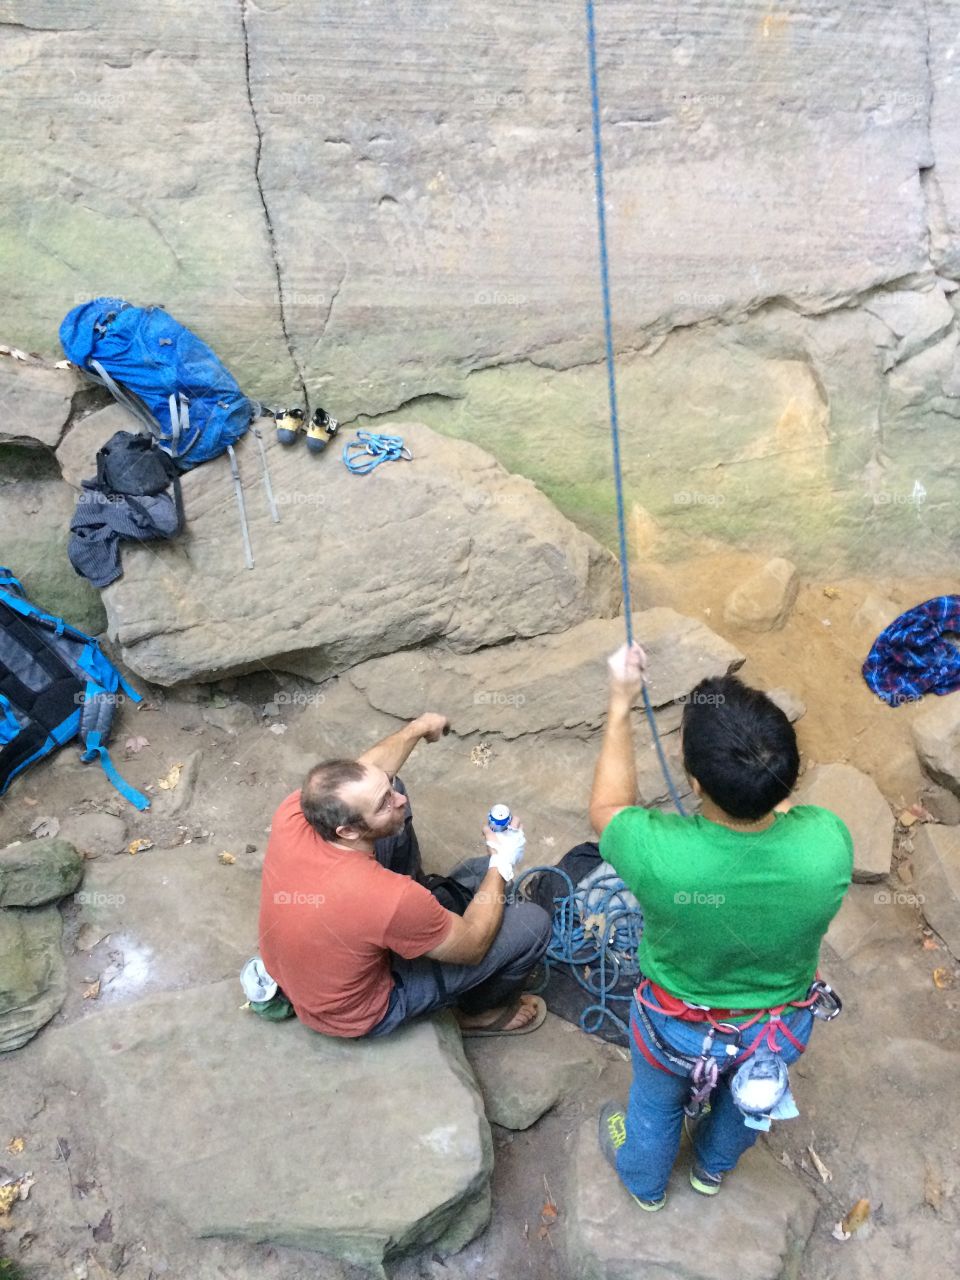 Belaying at the Red River Gorge